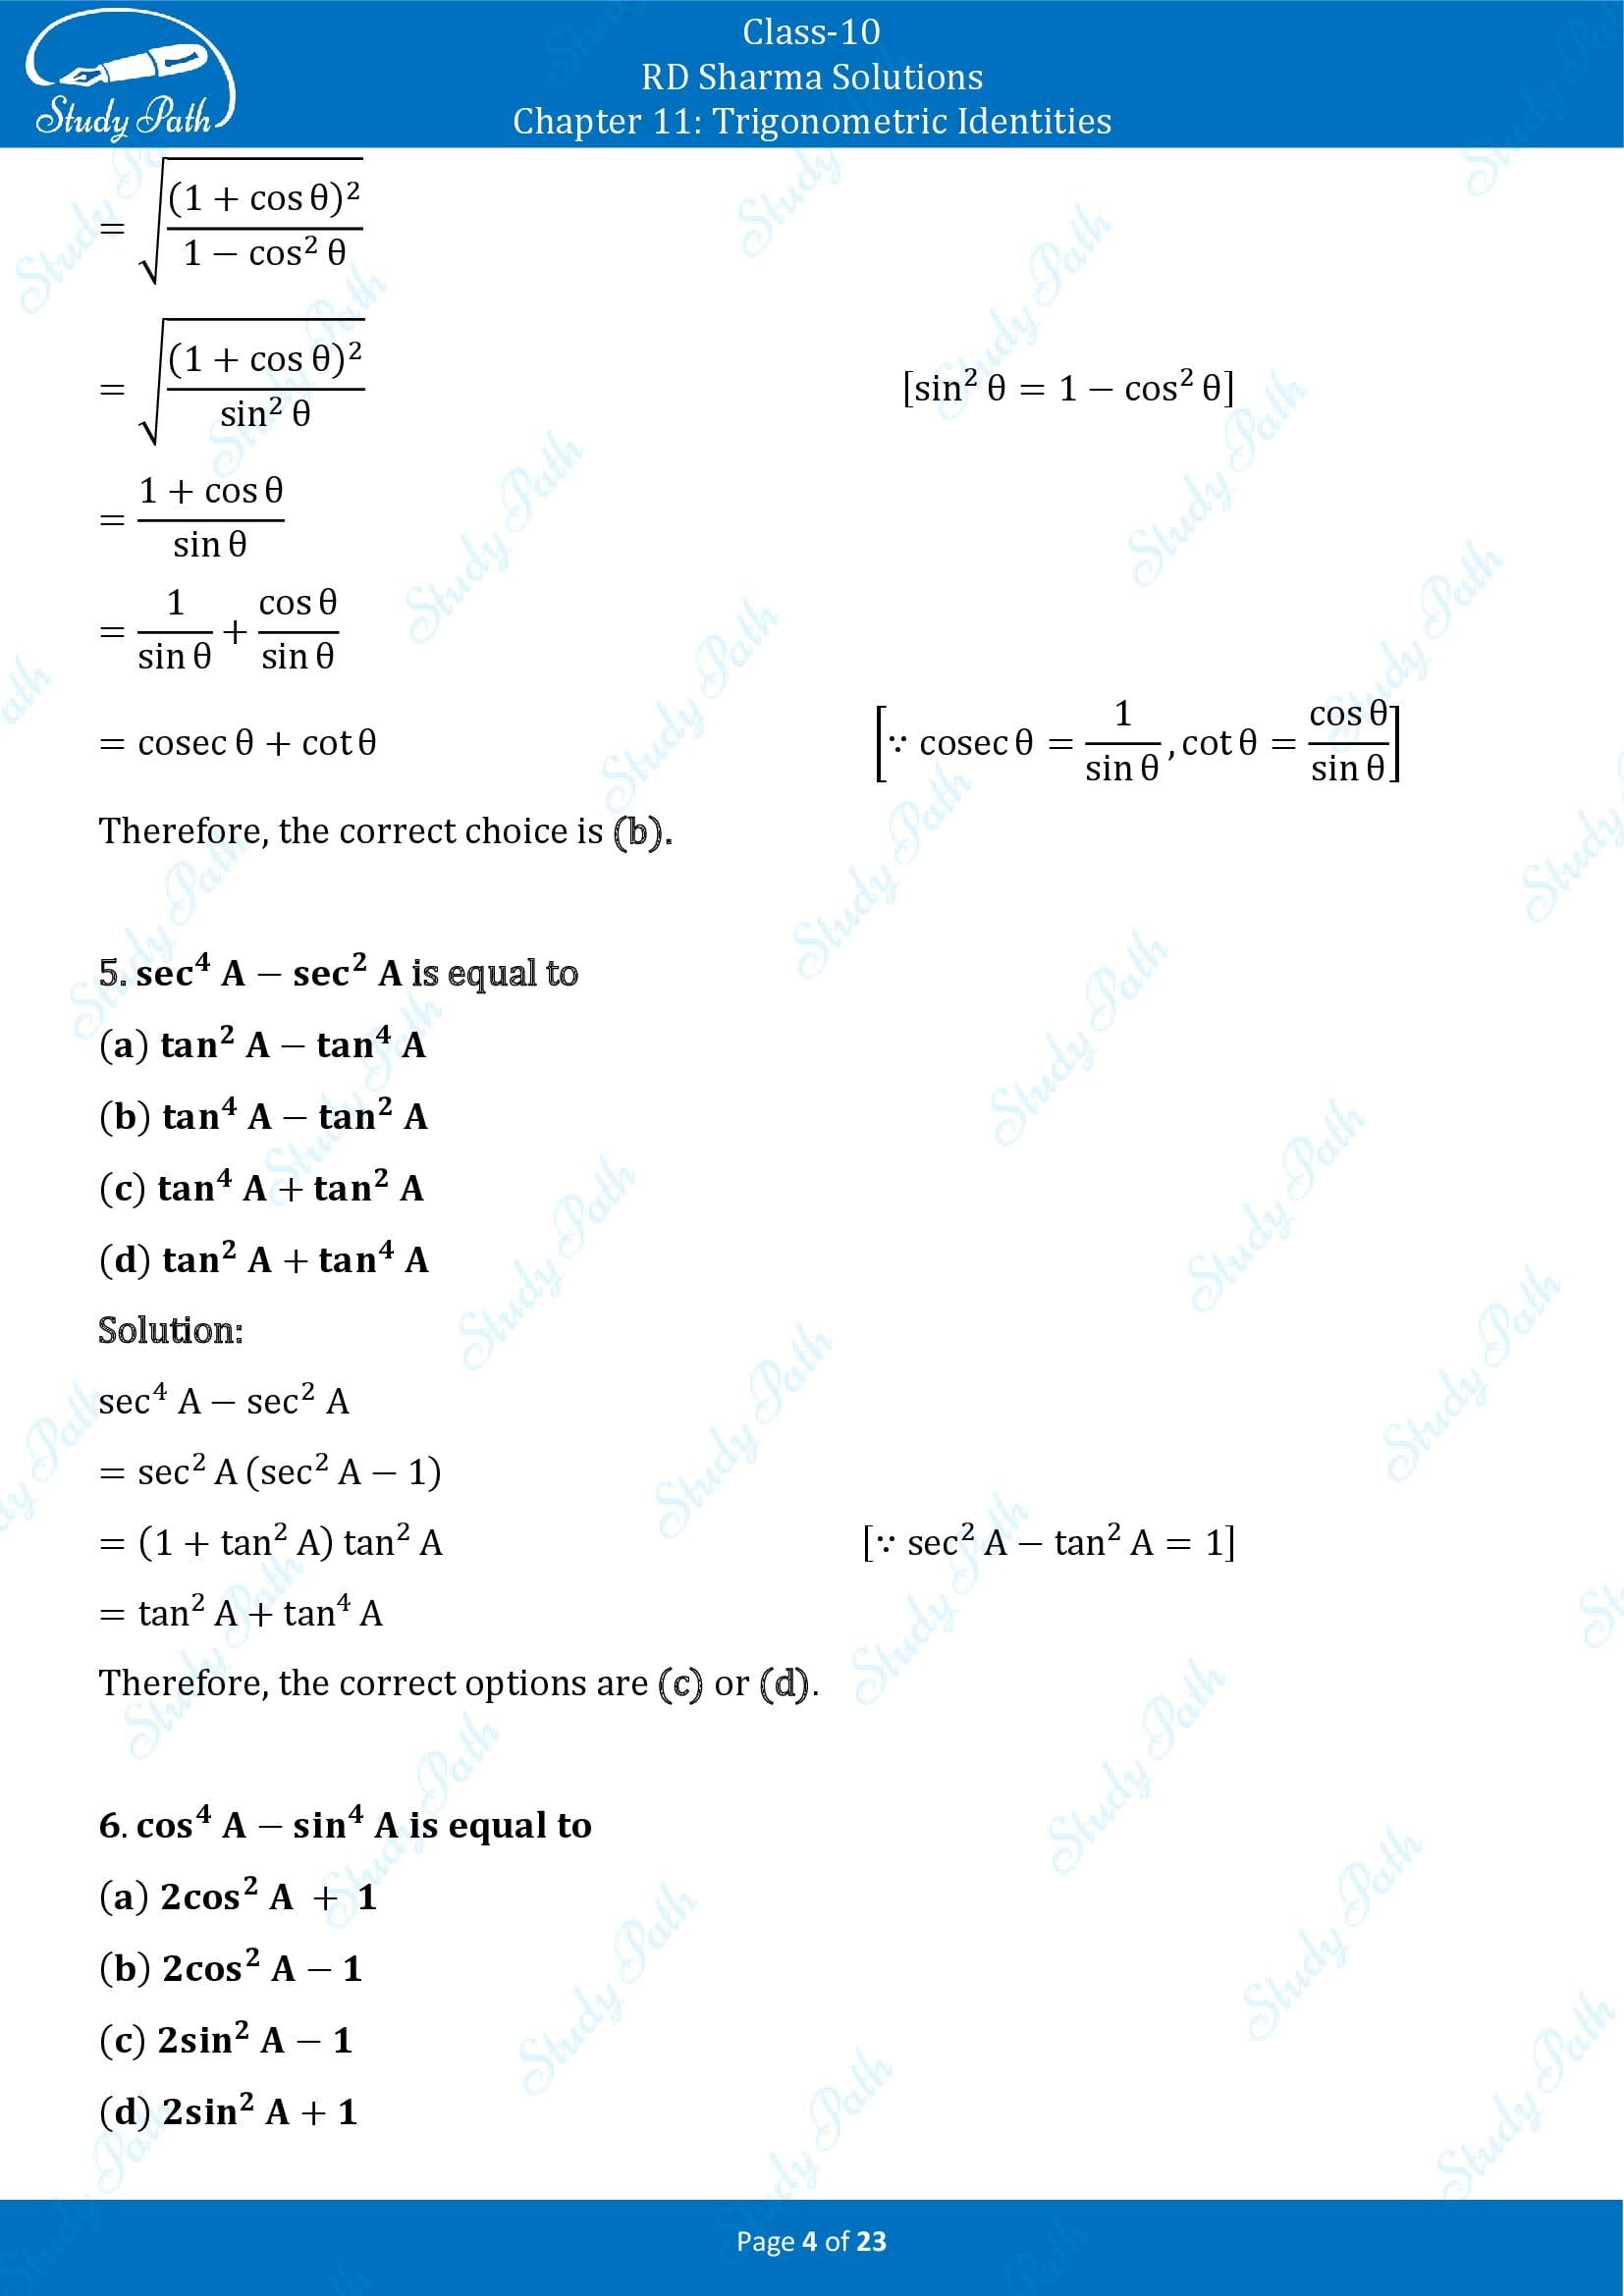 RD Sharma Solutions Class 10 Chapter 11 Trigonometric Identities Multiple Choice Questions MCQs 00004